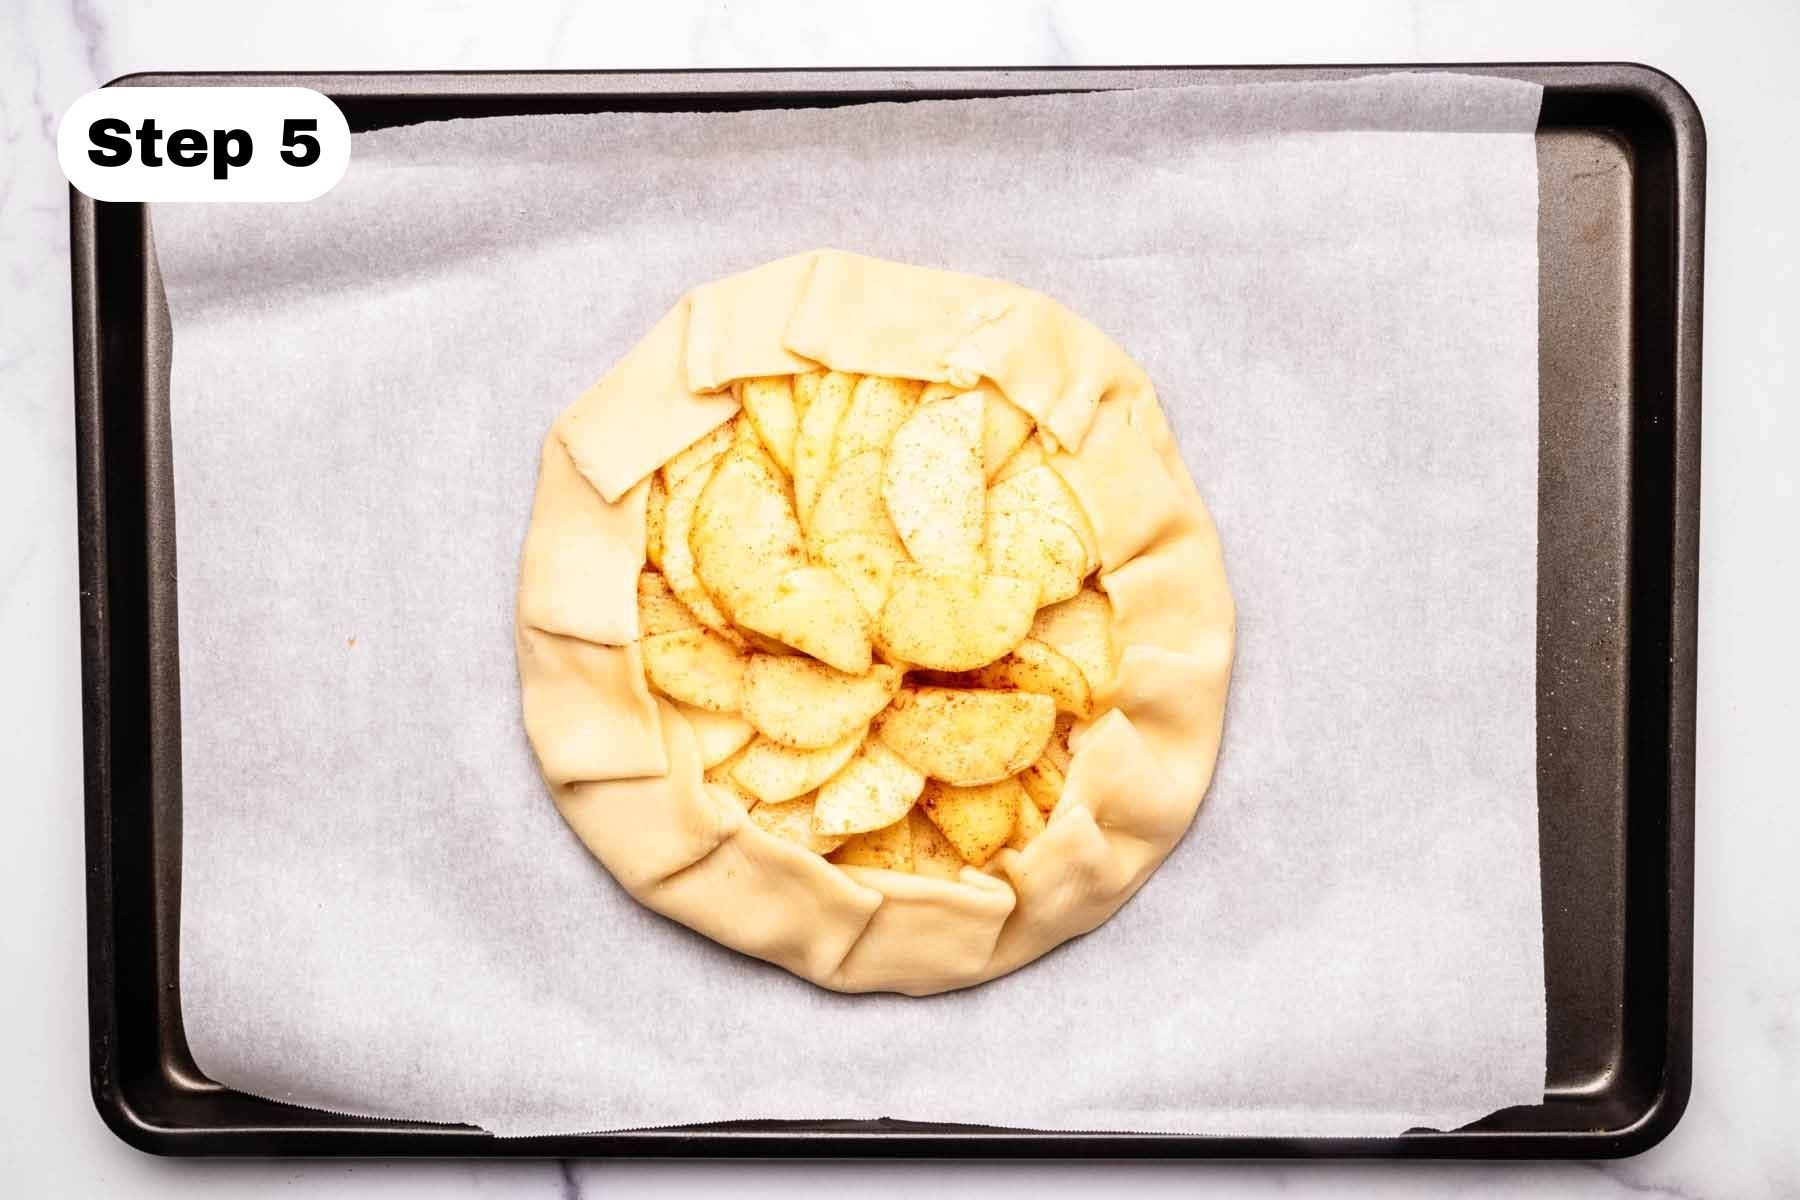 Unbaked apple galette on a baking sheet lined with parchment paper